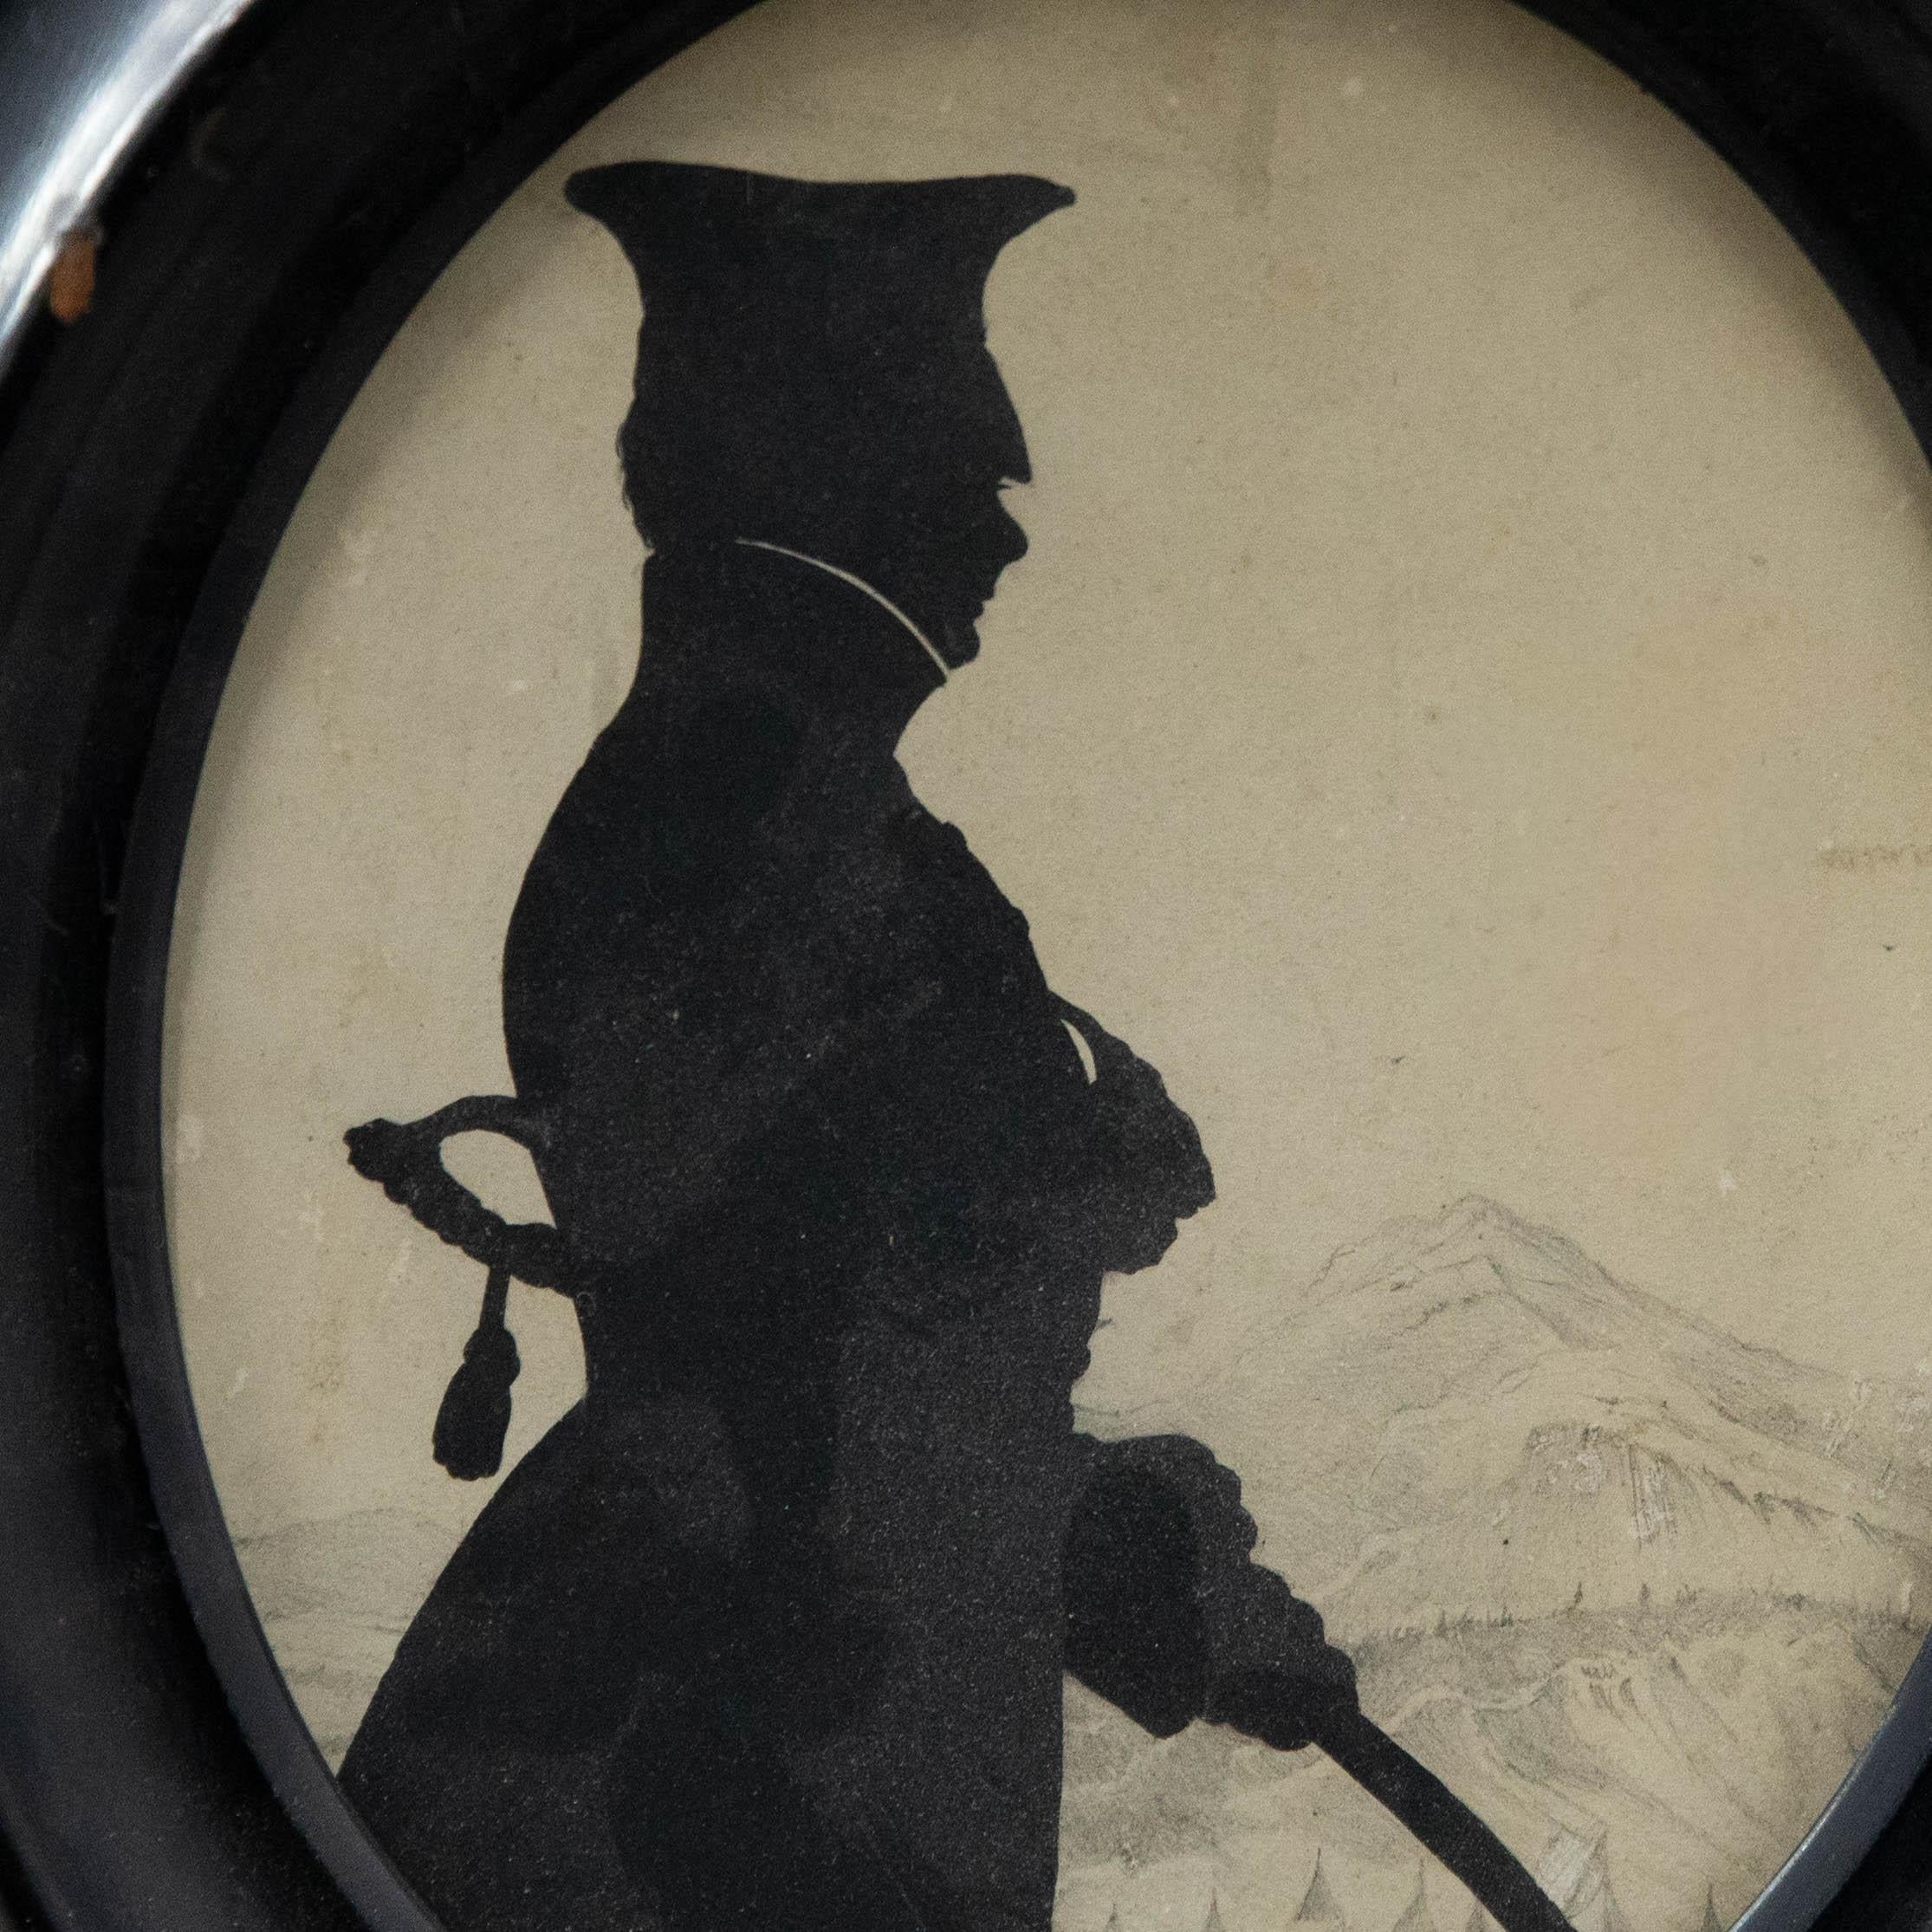 A charming silhouette study of an armed soldier before a graphite drawn alpine landscape. Unsigned. Well presented in an oval black lacquer frame. On paper.